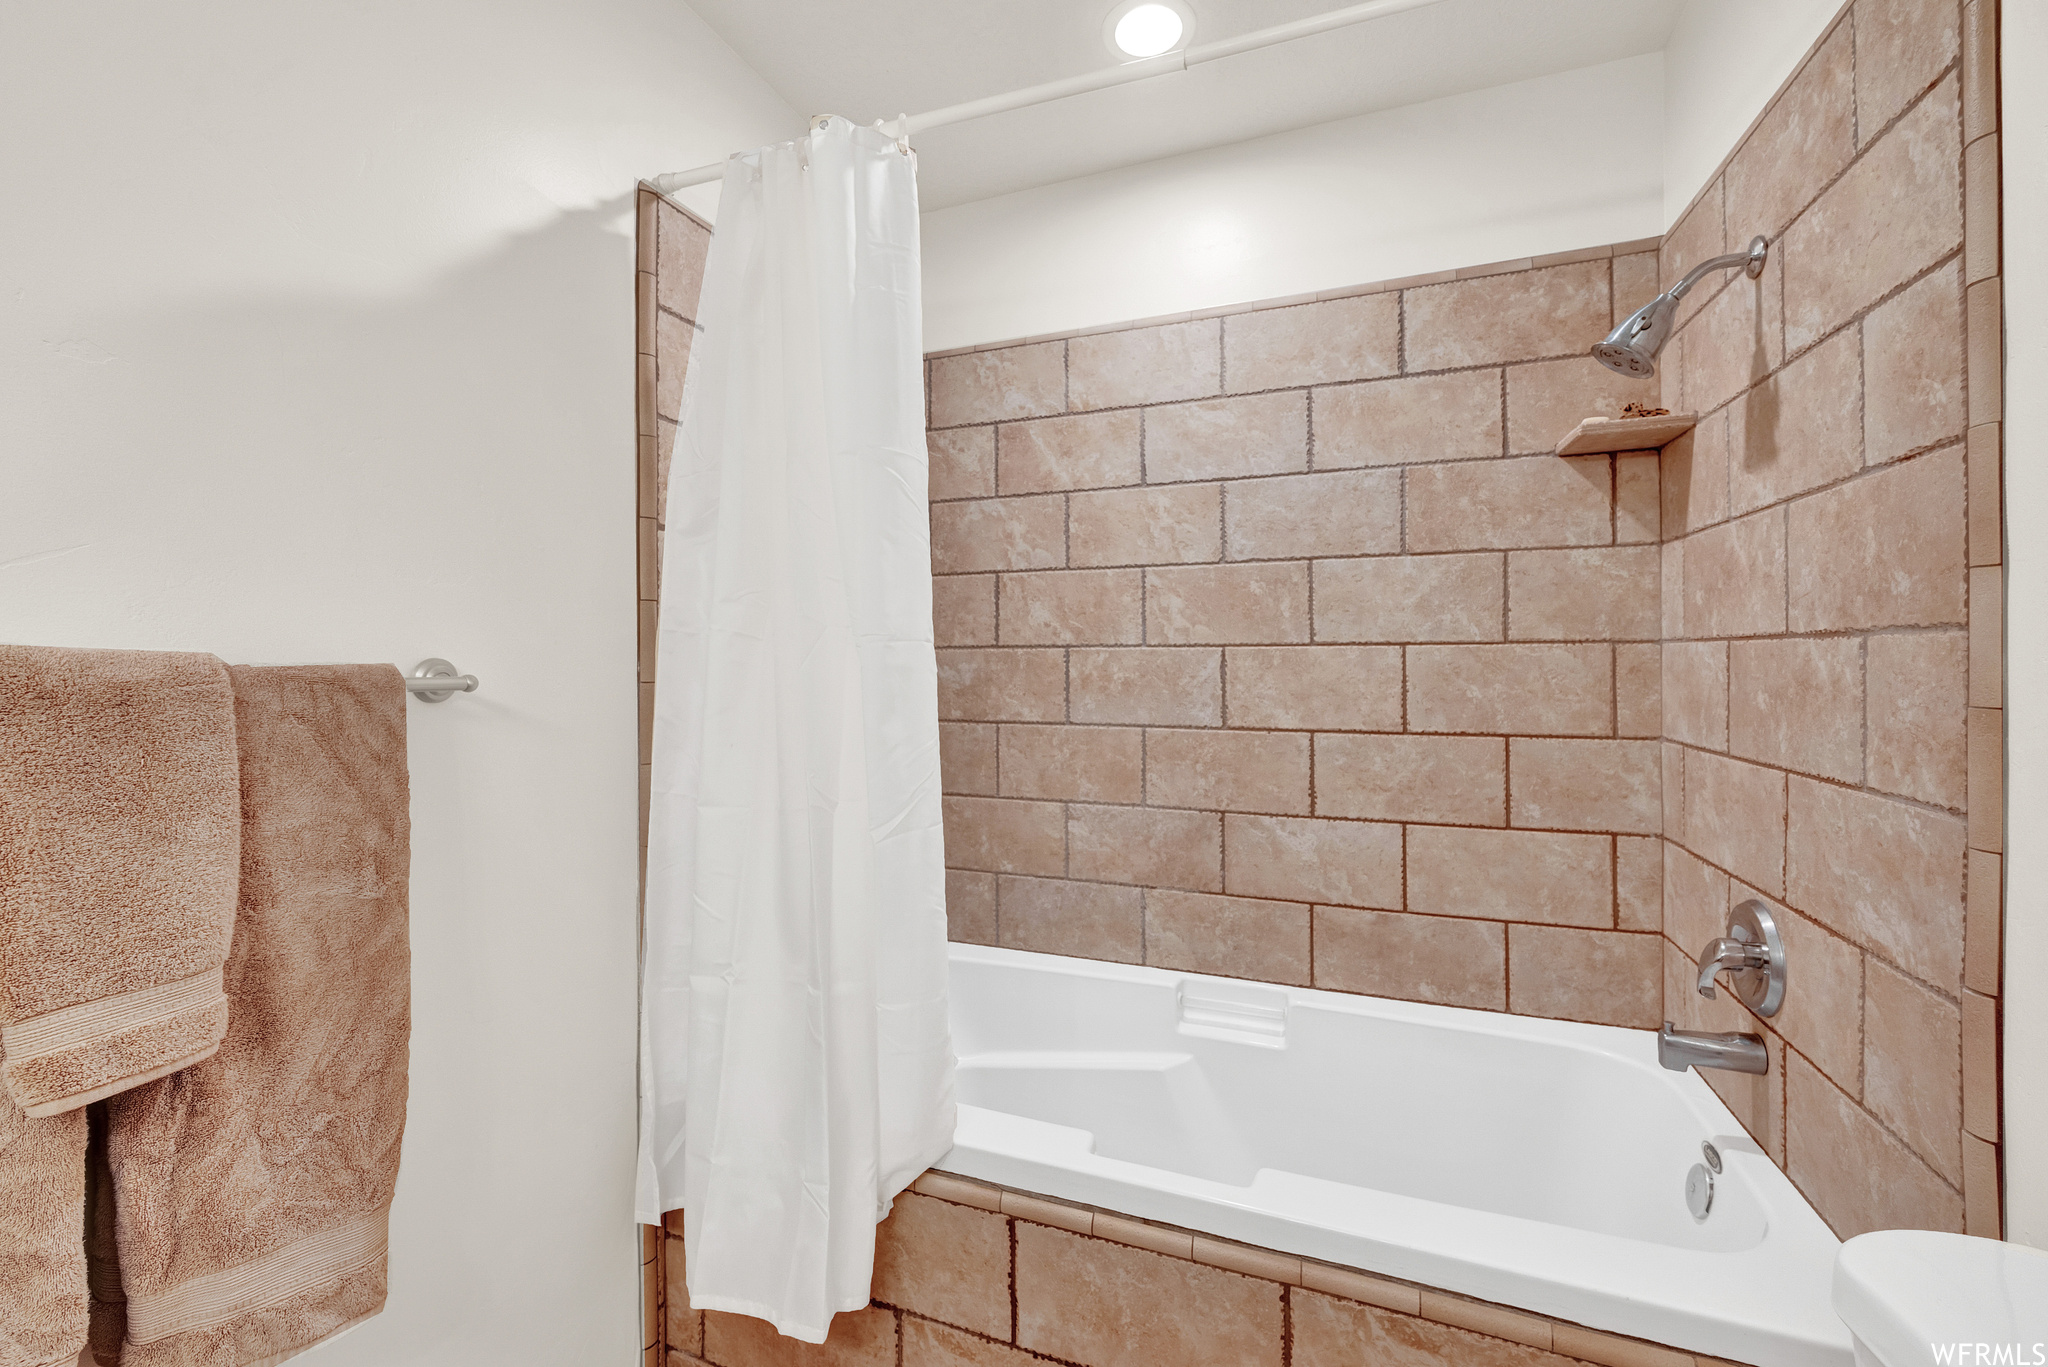 Level 2 Bathroom: Master ensuite bathroom with shower curtain, tub / shower combination, and toilet